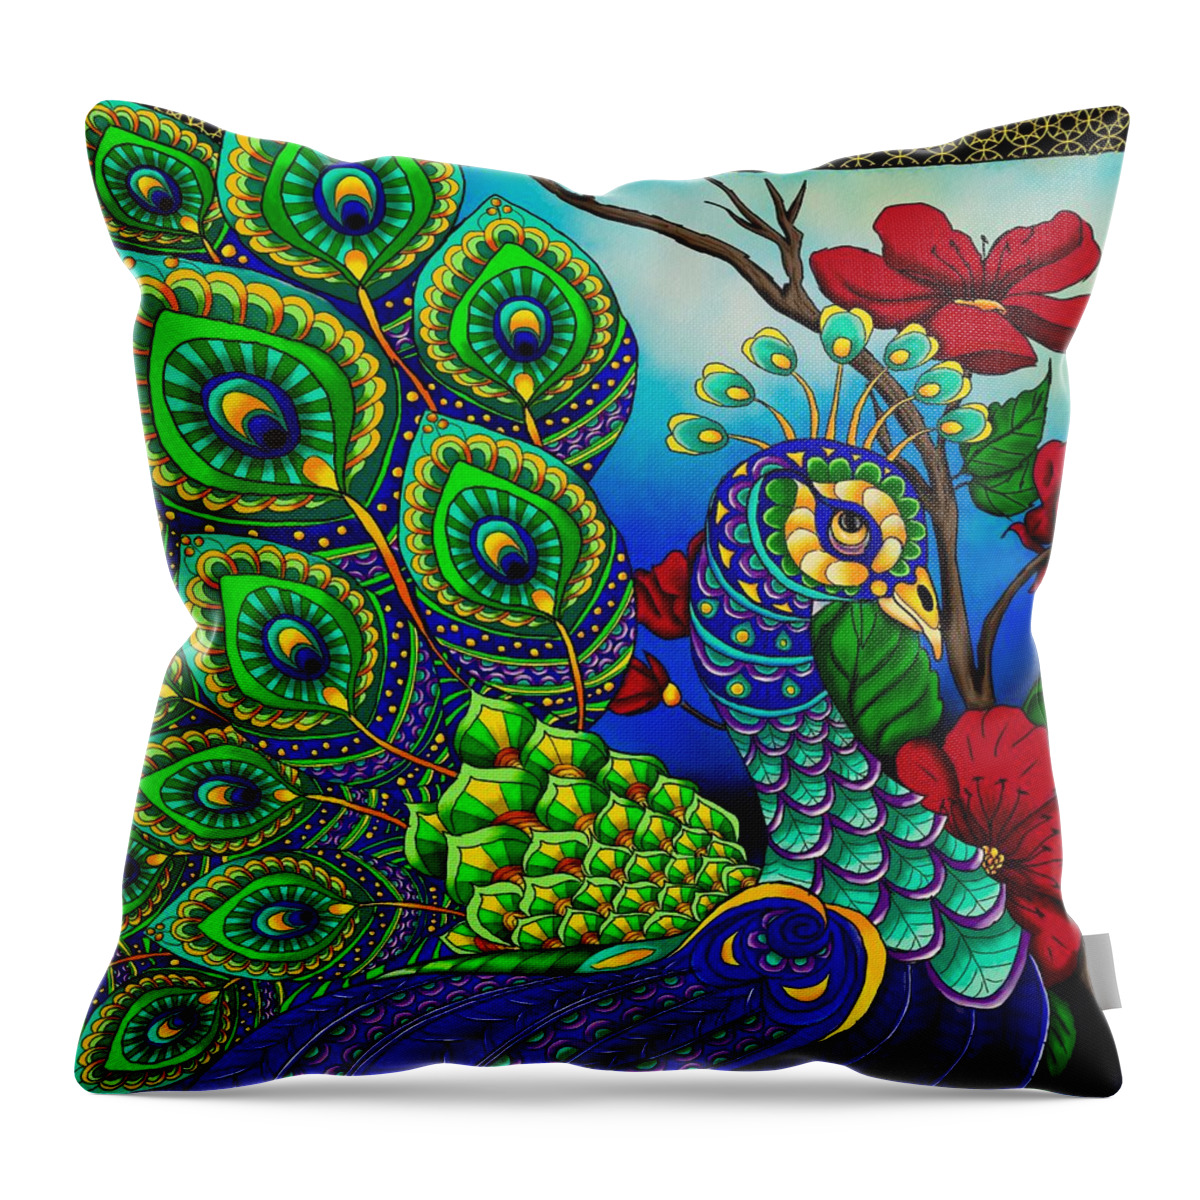 Peacock Throw Pillow featuring the painting Peacock Zentangle Inspired Art by Becky Herrera